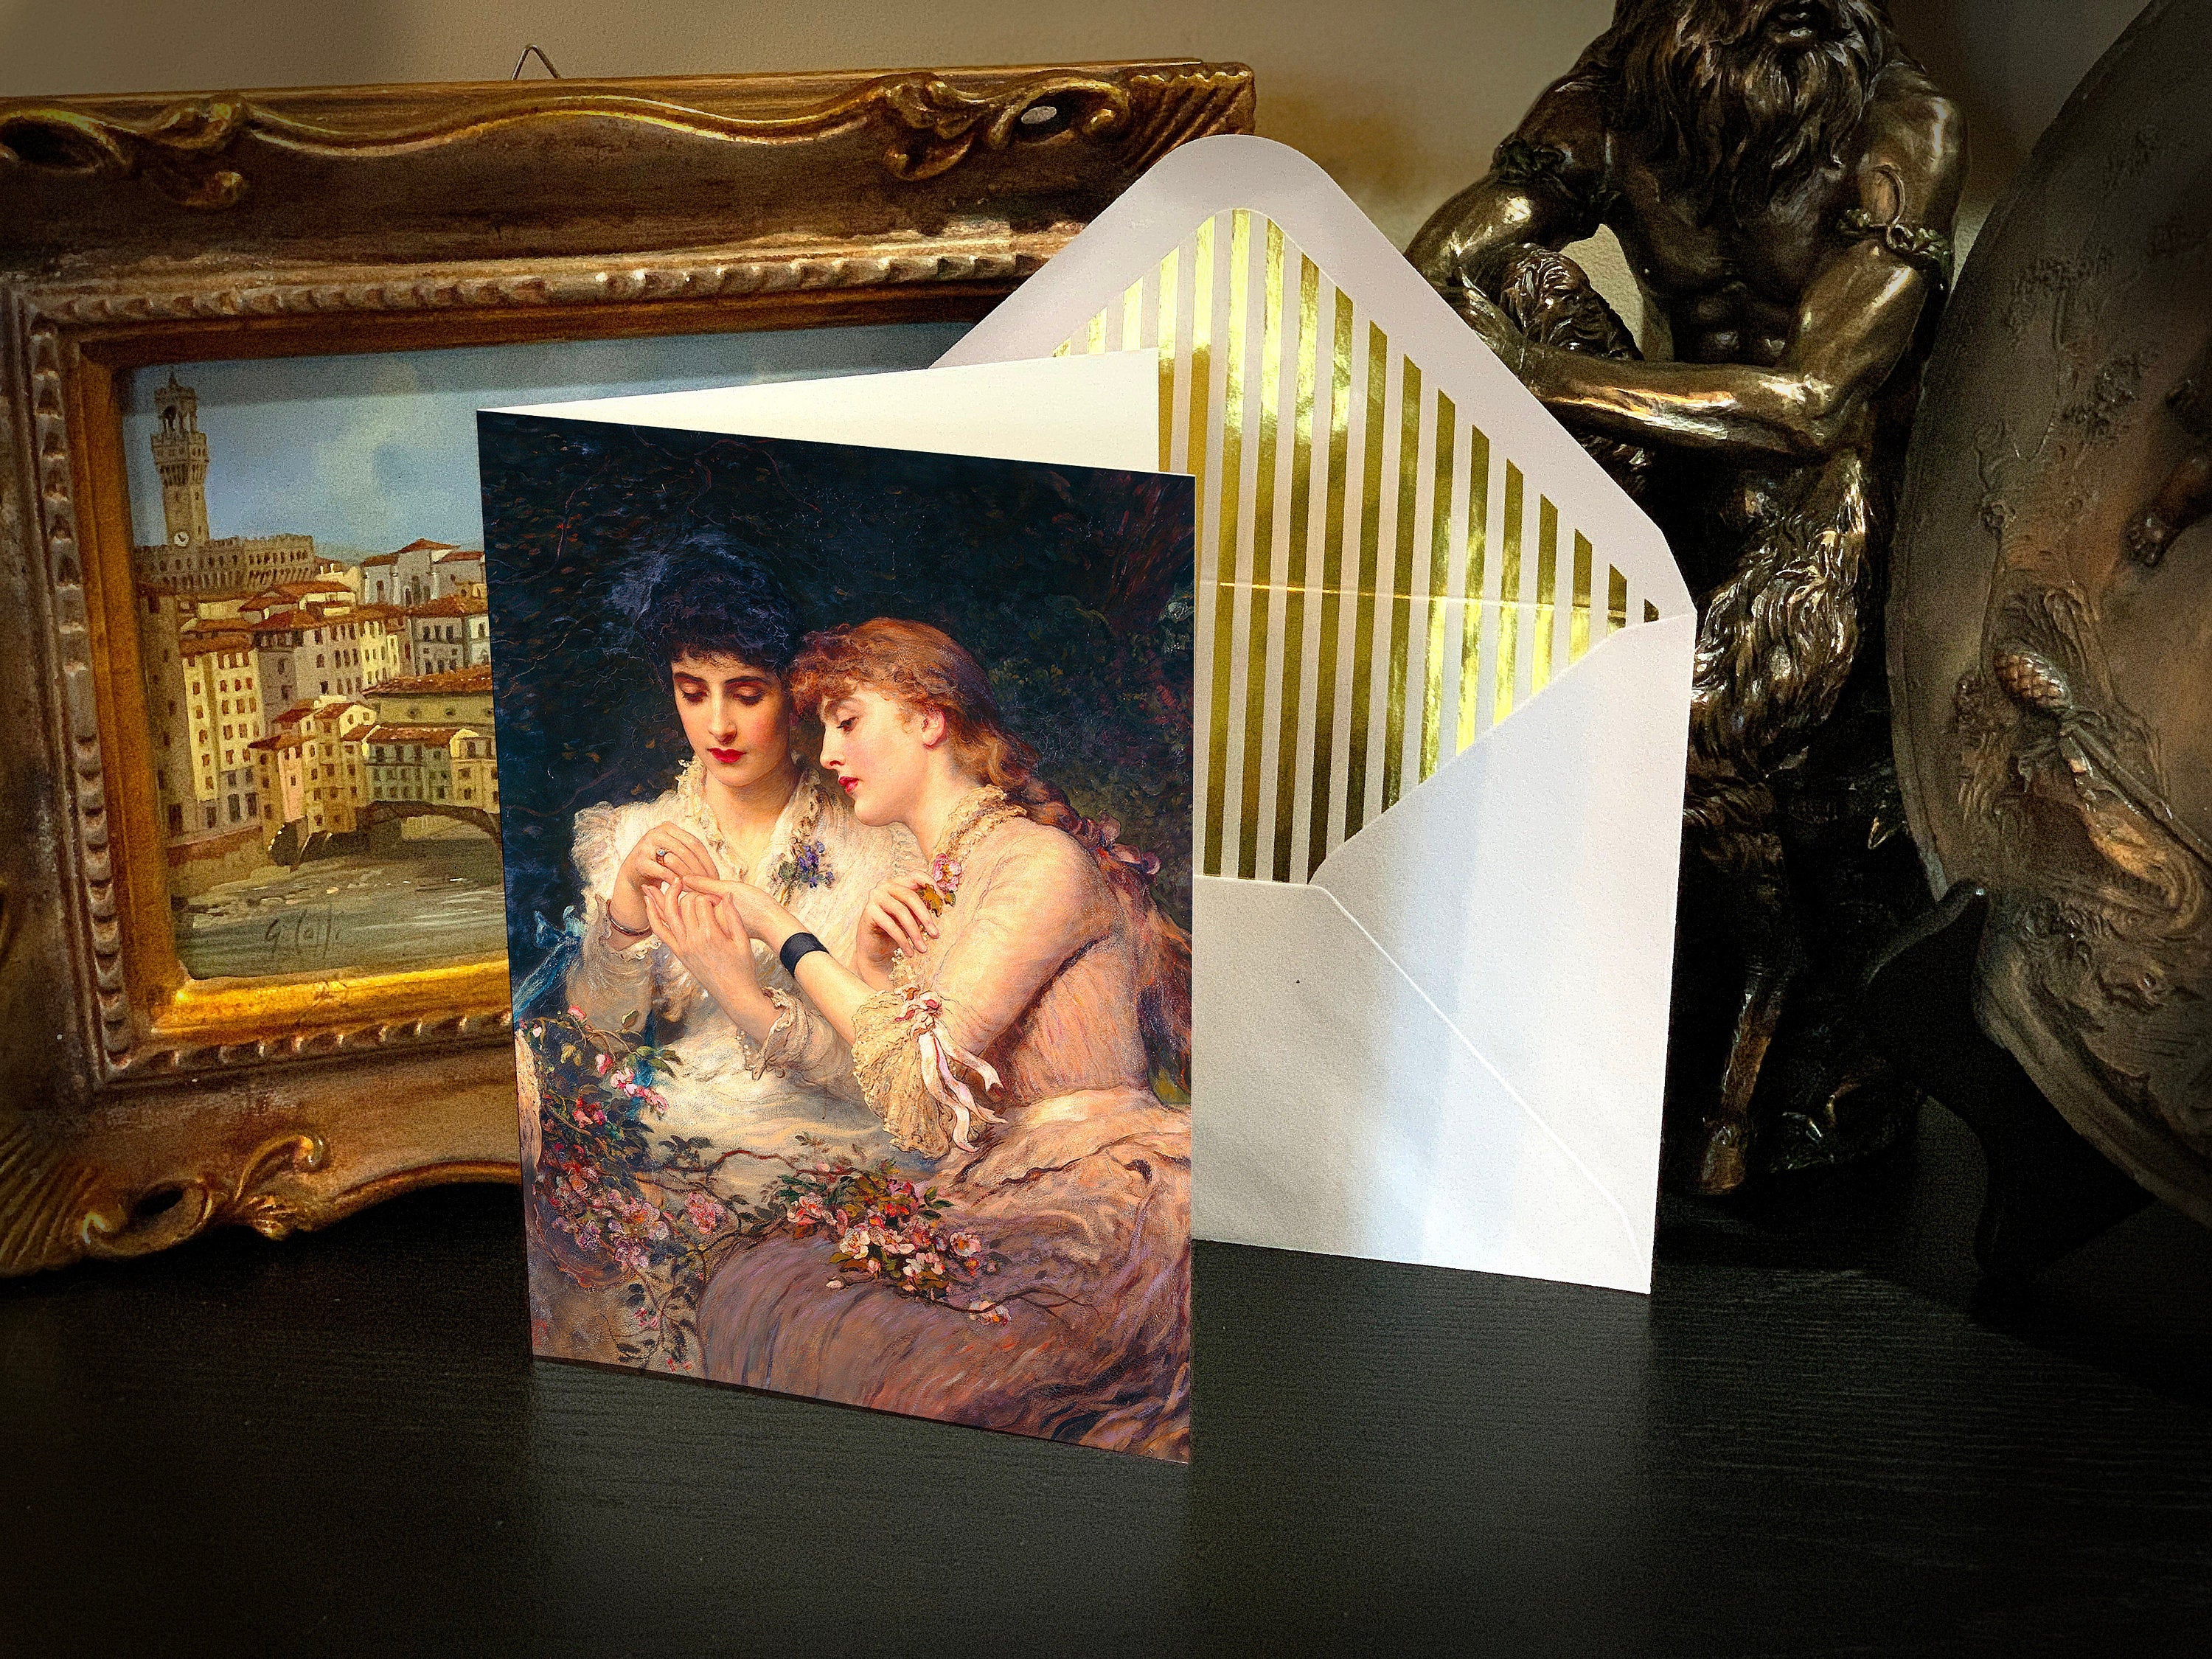 A Thorn Among the Roses, Lesbian Valentine's Day Greeting Card with Gold Foil Envelope, 1 Card/Envelope